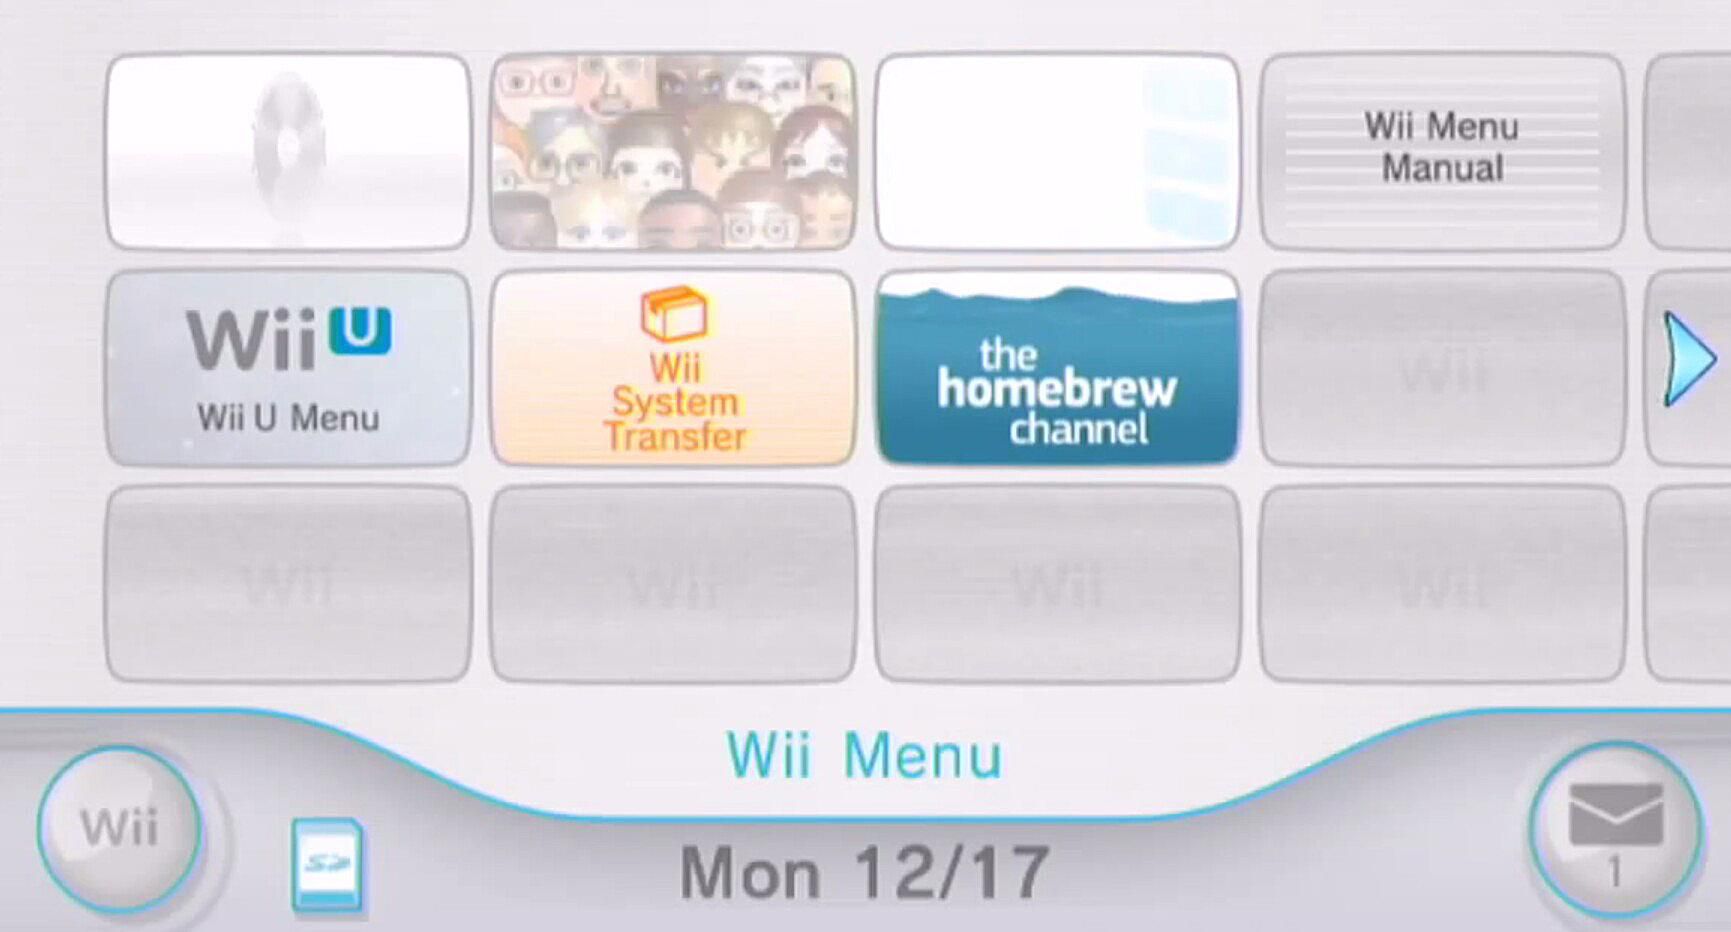 the homebrew channel wii